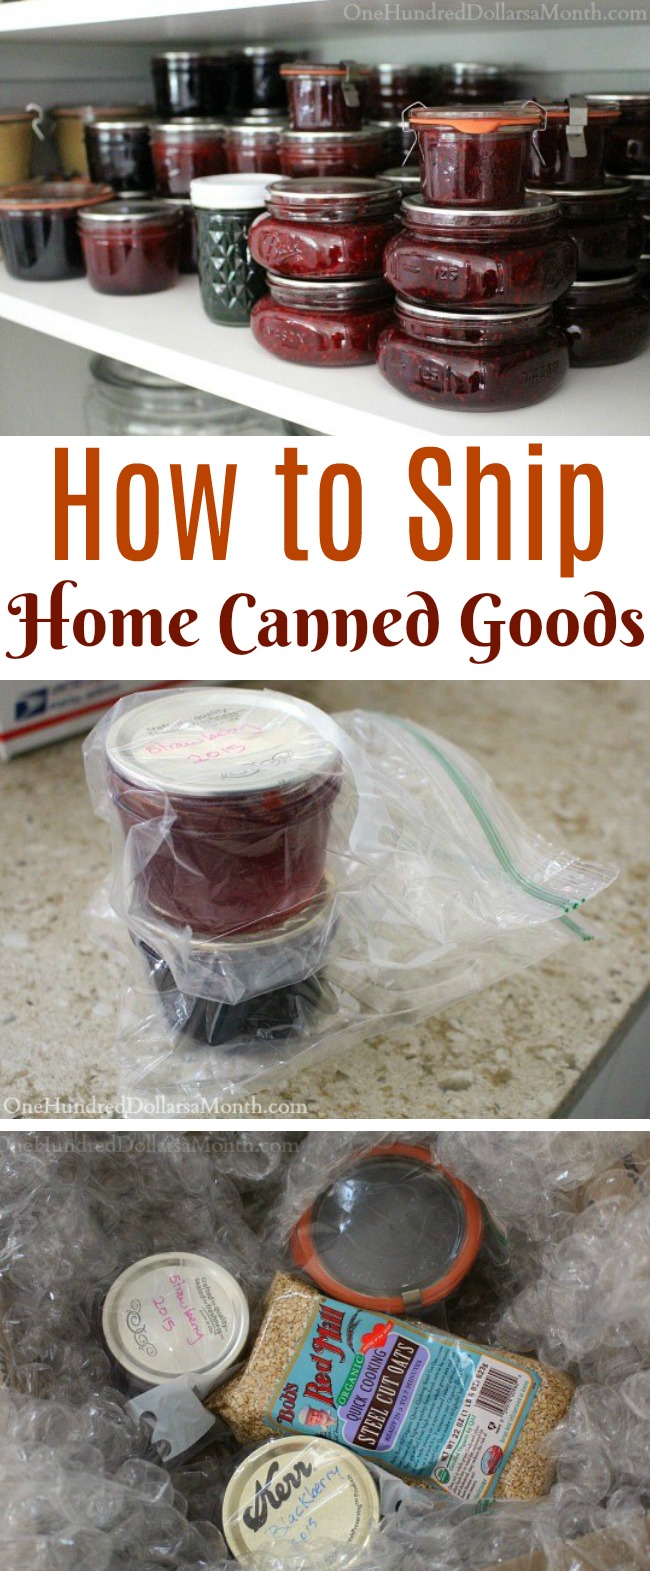 How to Ship Home Canned Goods